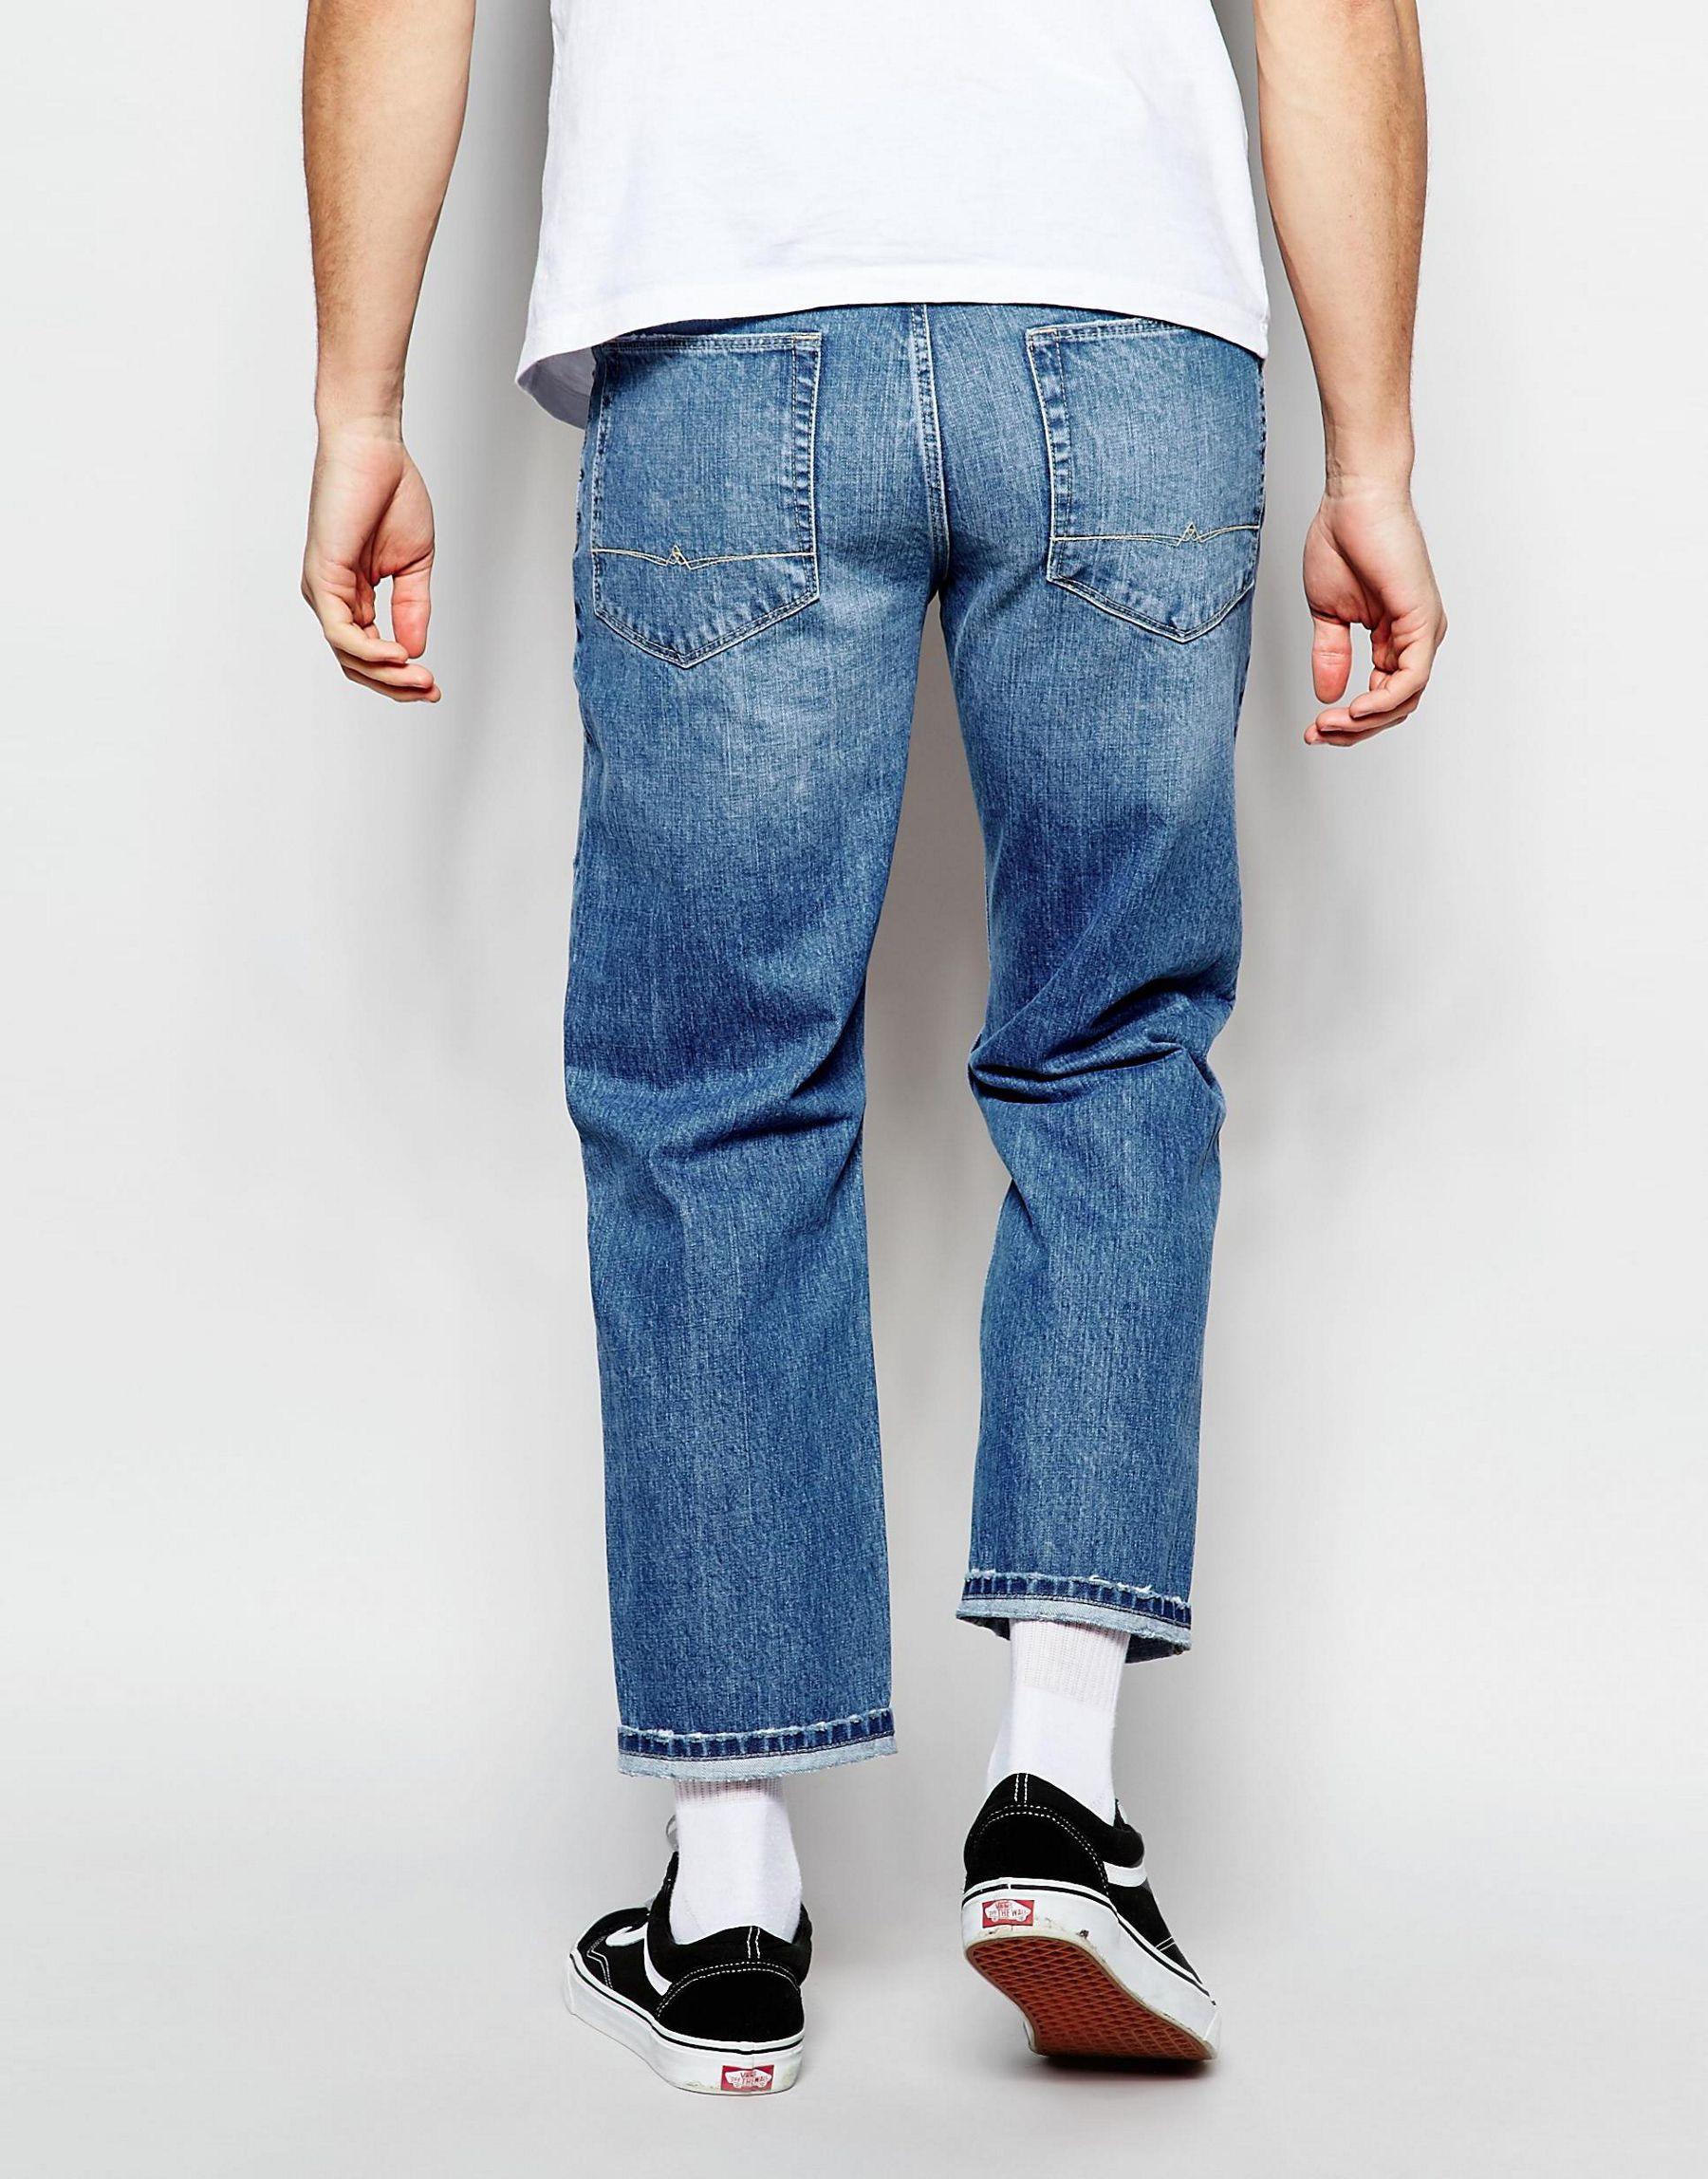 Lyst - Asos Straight Jeans In Cropped Length With Patches in Blue for Men